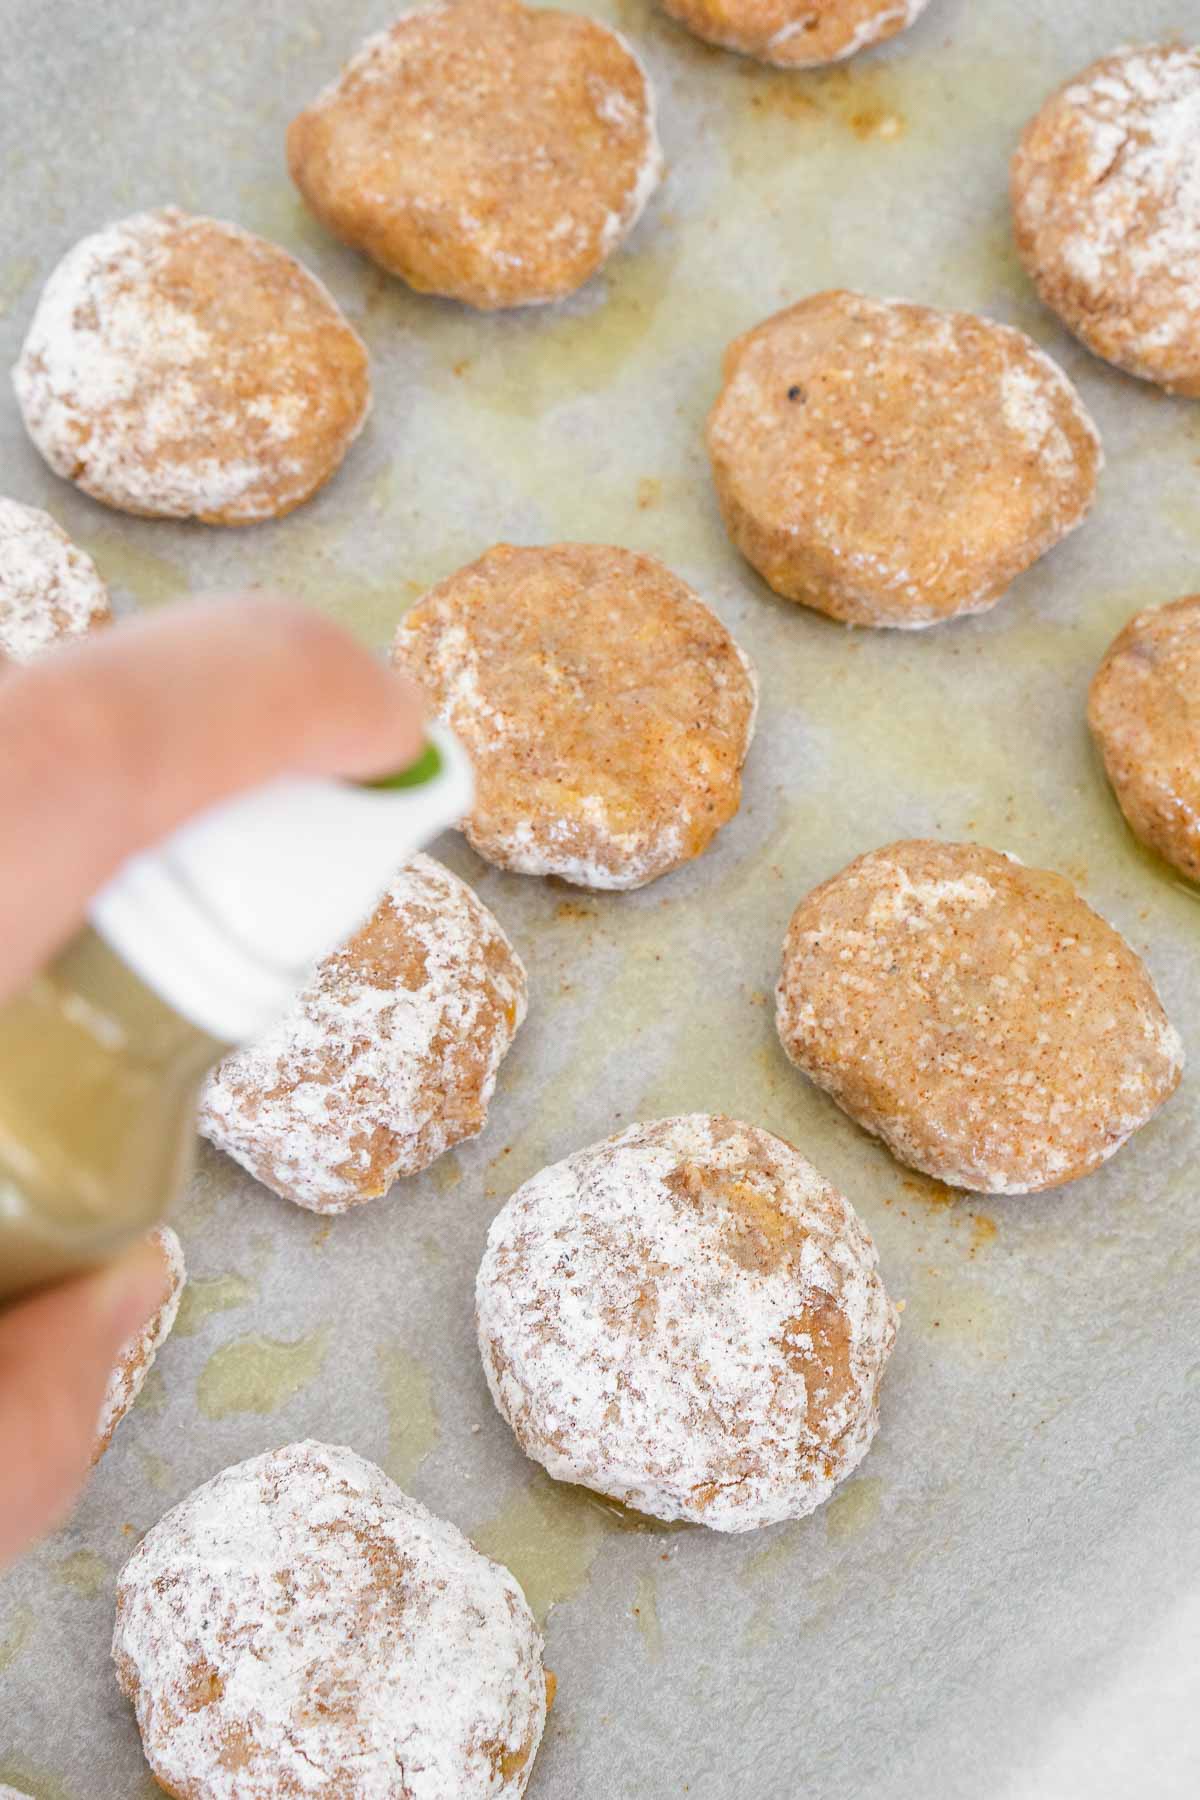 Spraying olive oil on unbaked nuggets.